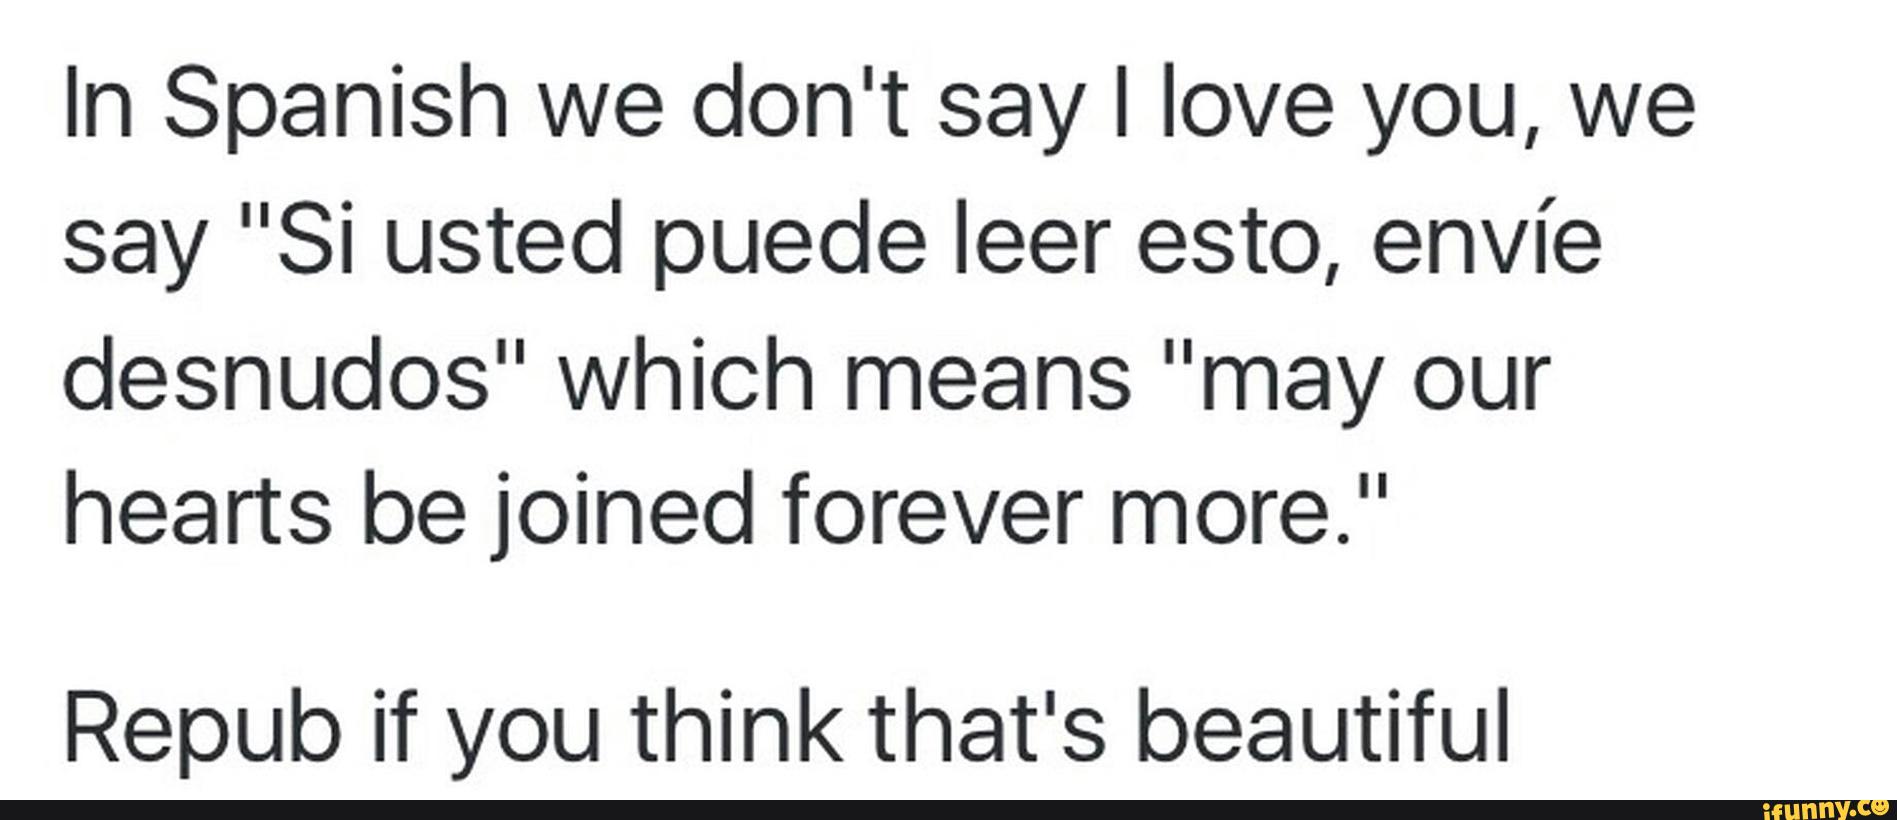 In Spanish We Don T Sayl Love You We Say Si Usted Puede Leer Esto Envi E Desnudos Which Means May Our Hearts Be Joined Forever More Repub If You Think That S Beautiful